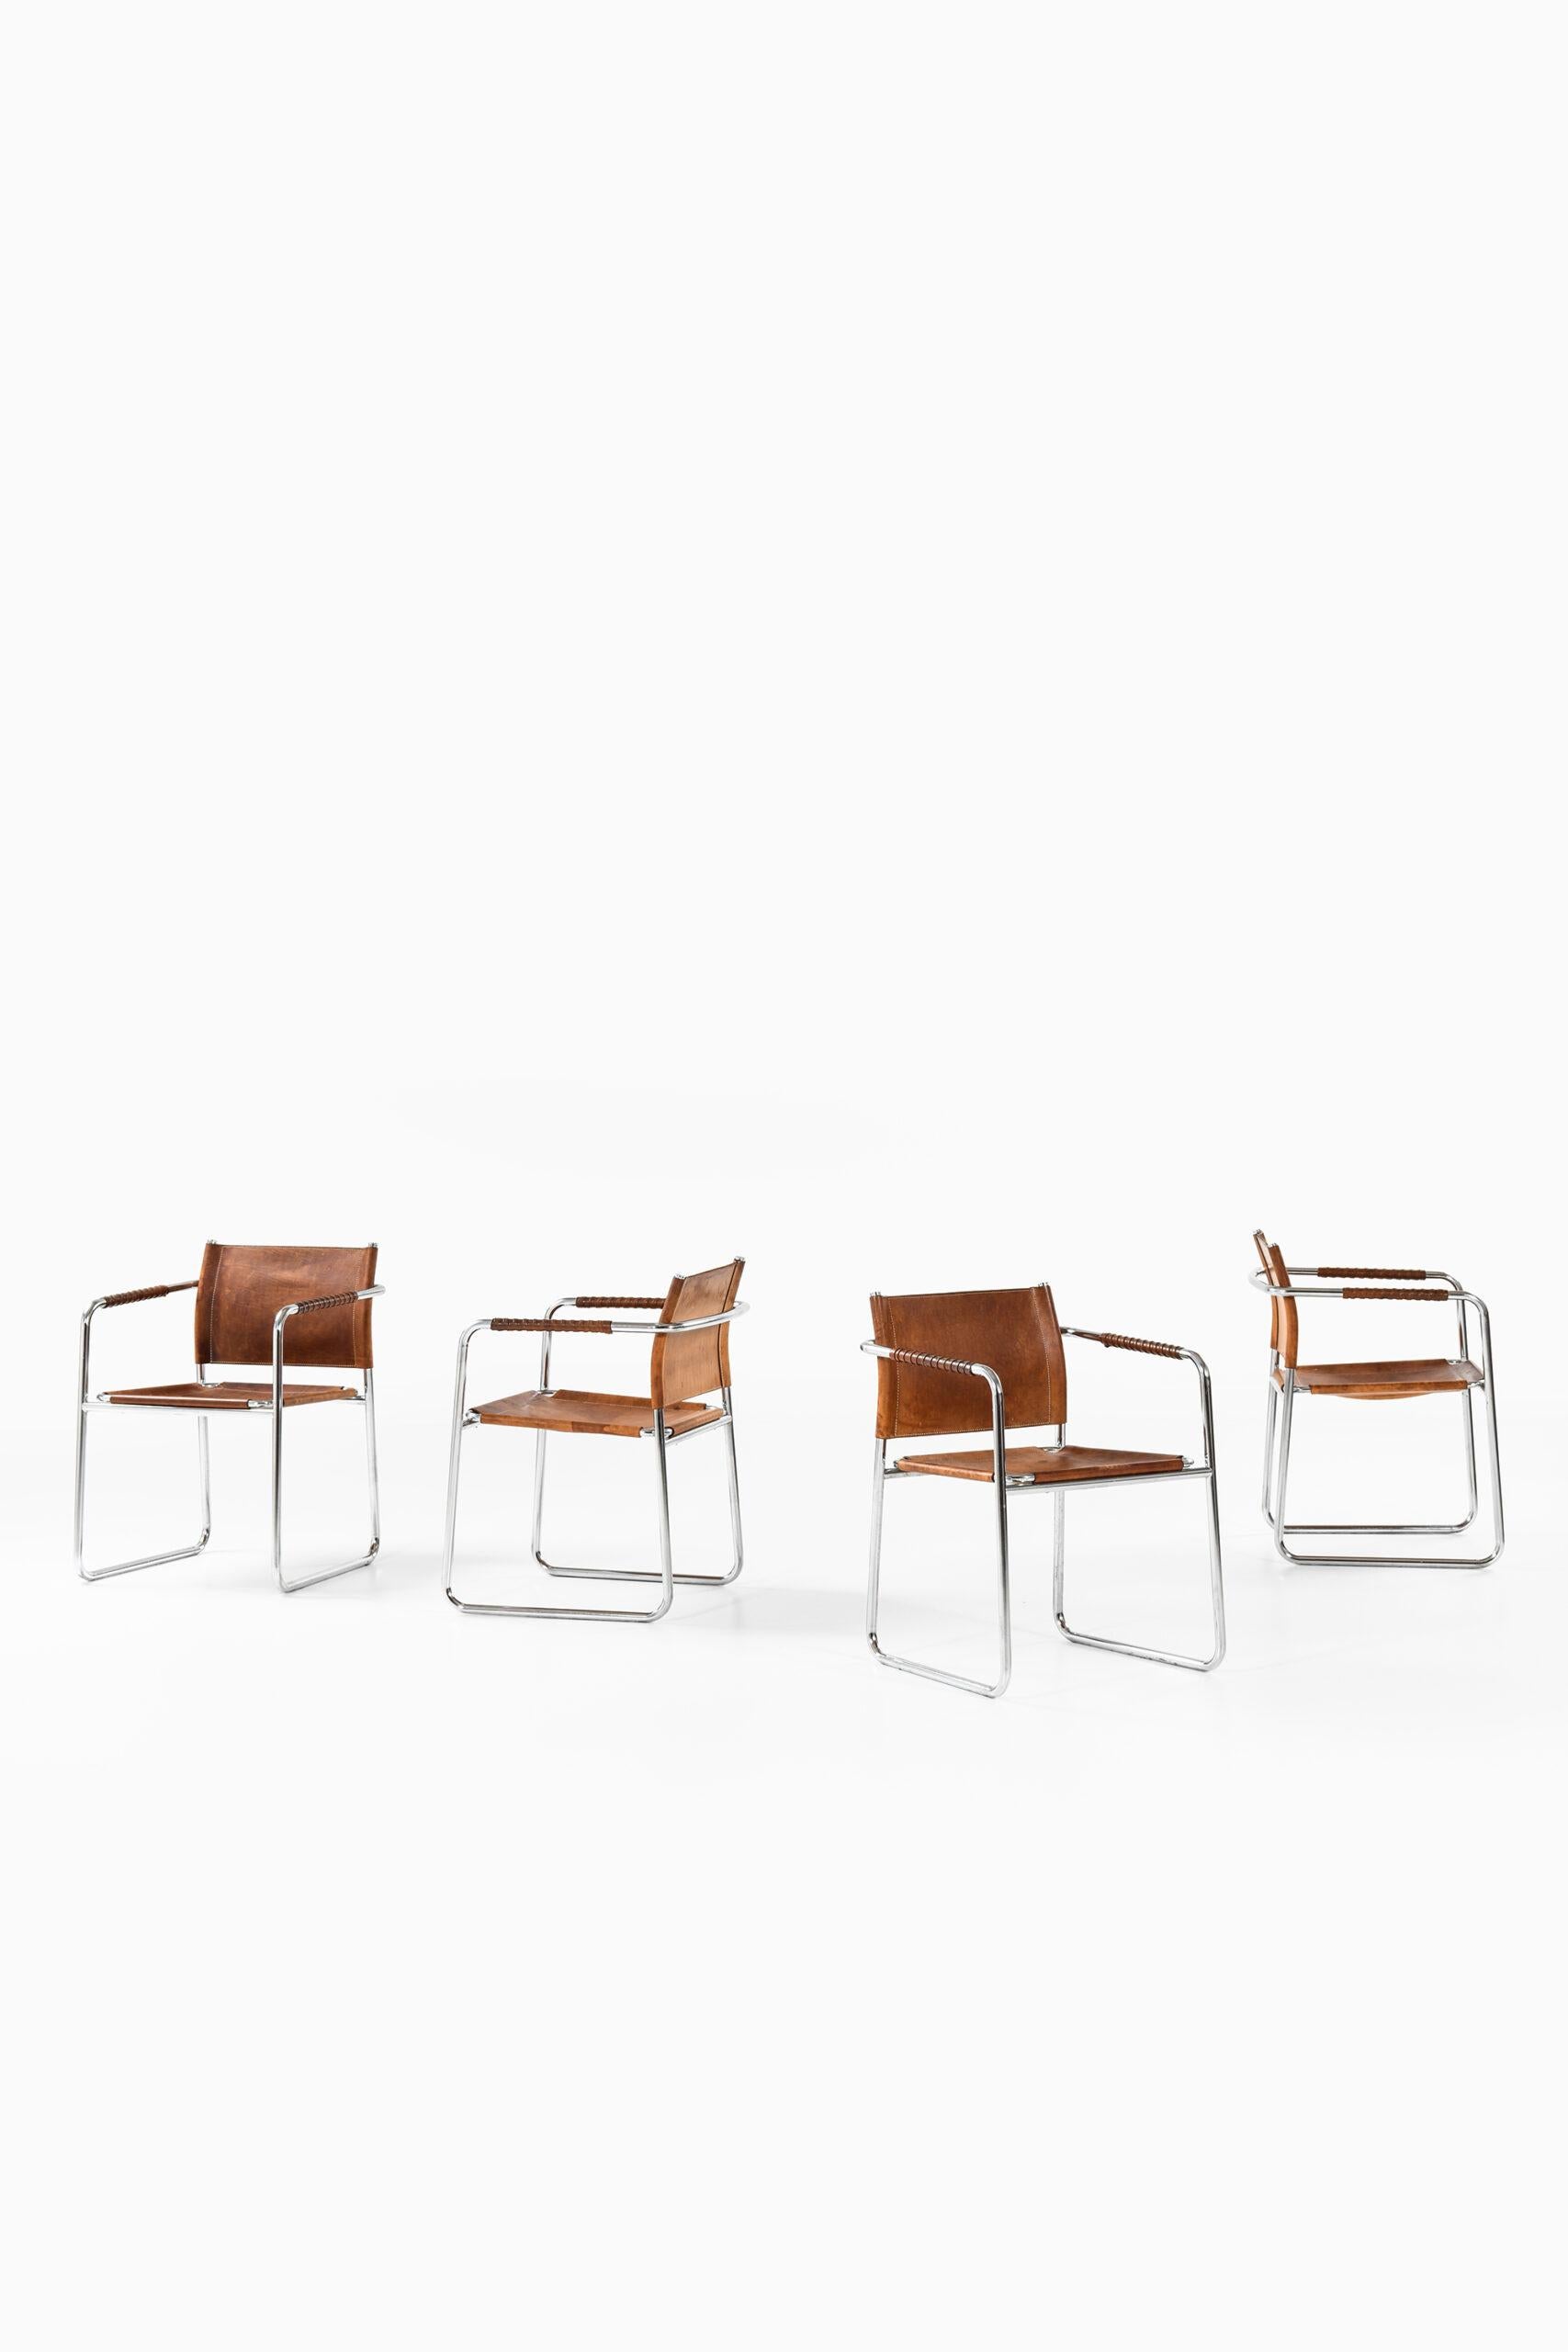 Karin Mobring Armchairs Model Amiral Produced in Sweden 2